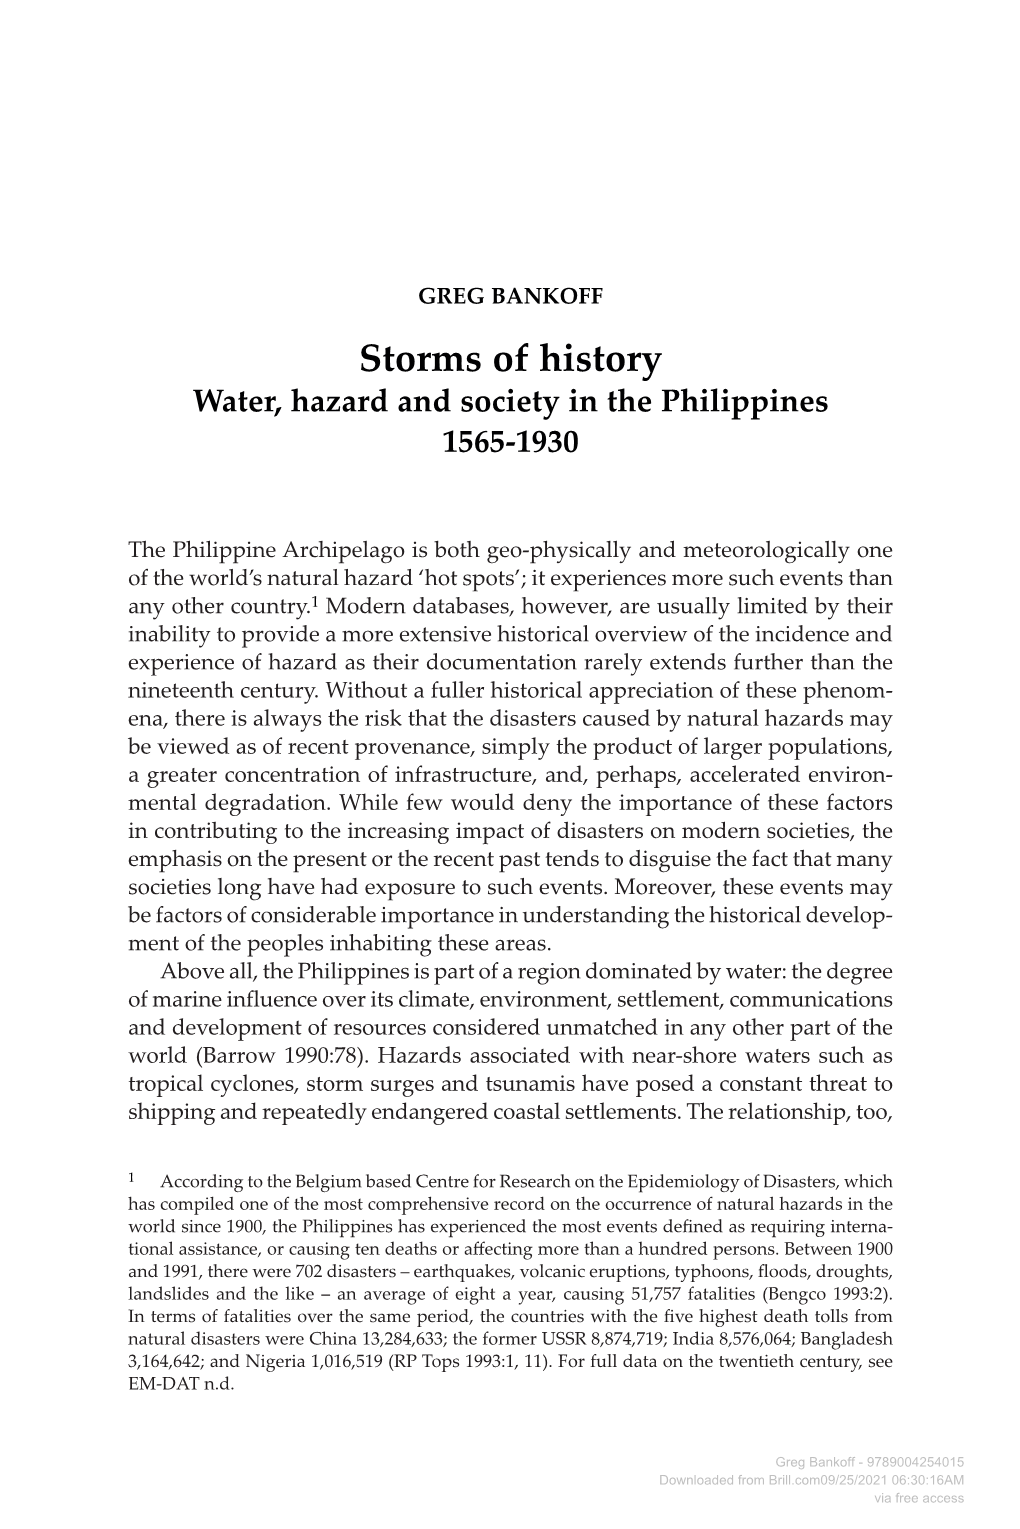 Storms of History Water, Hazard and Society in the Philippines 1565-1930